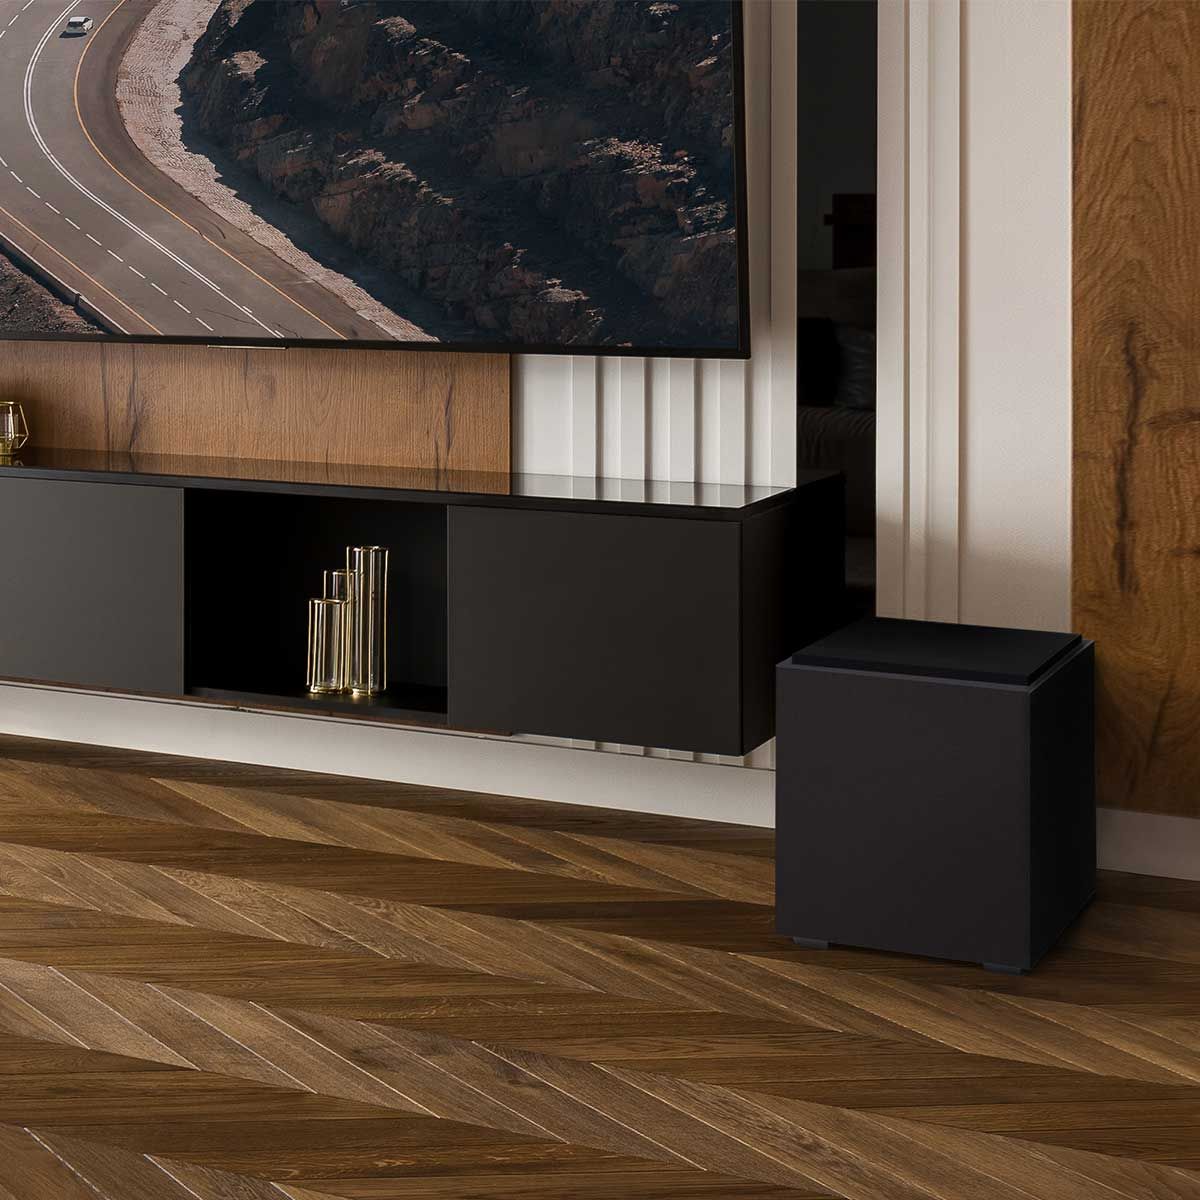 Definitive Technology Descend 10" Subwoofer, Midnight Black, set up beside a black media cabinet and large television in a wood-paneled living space